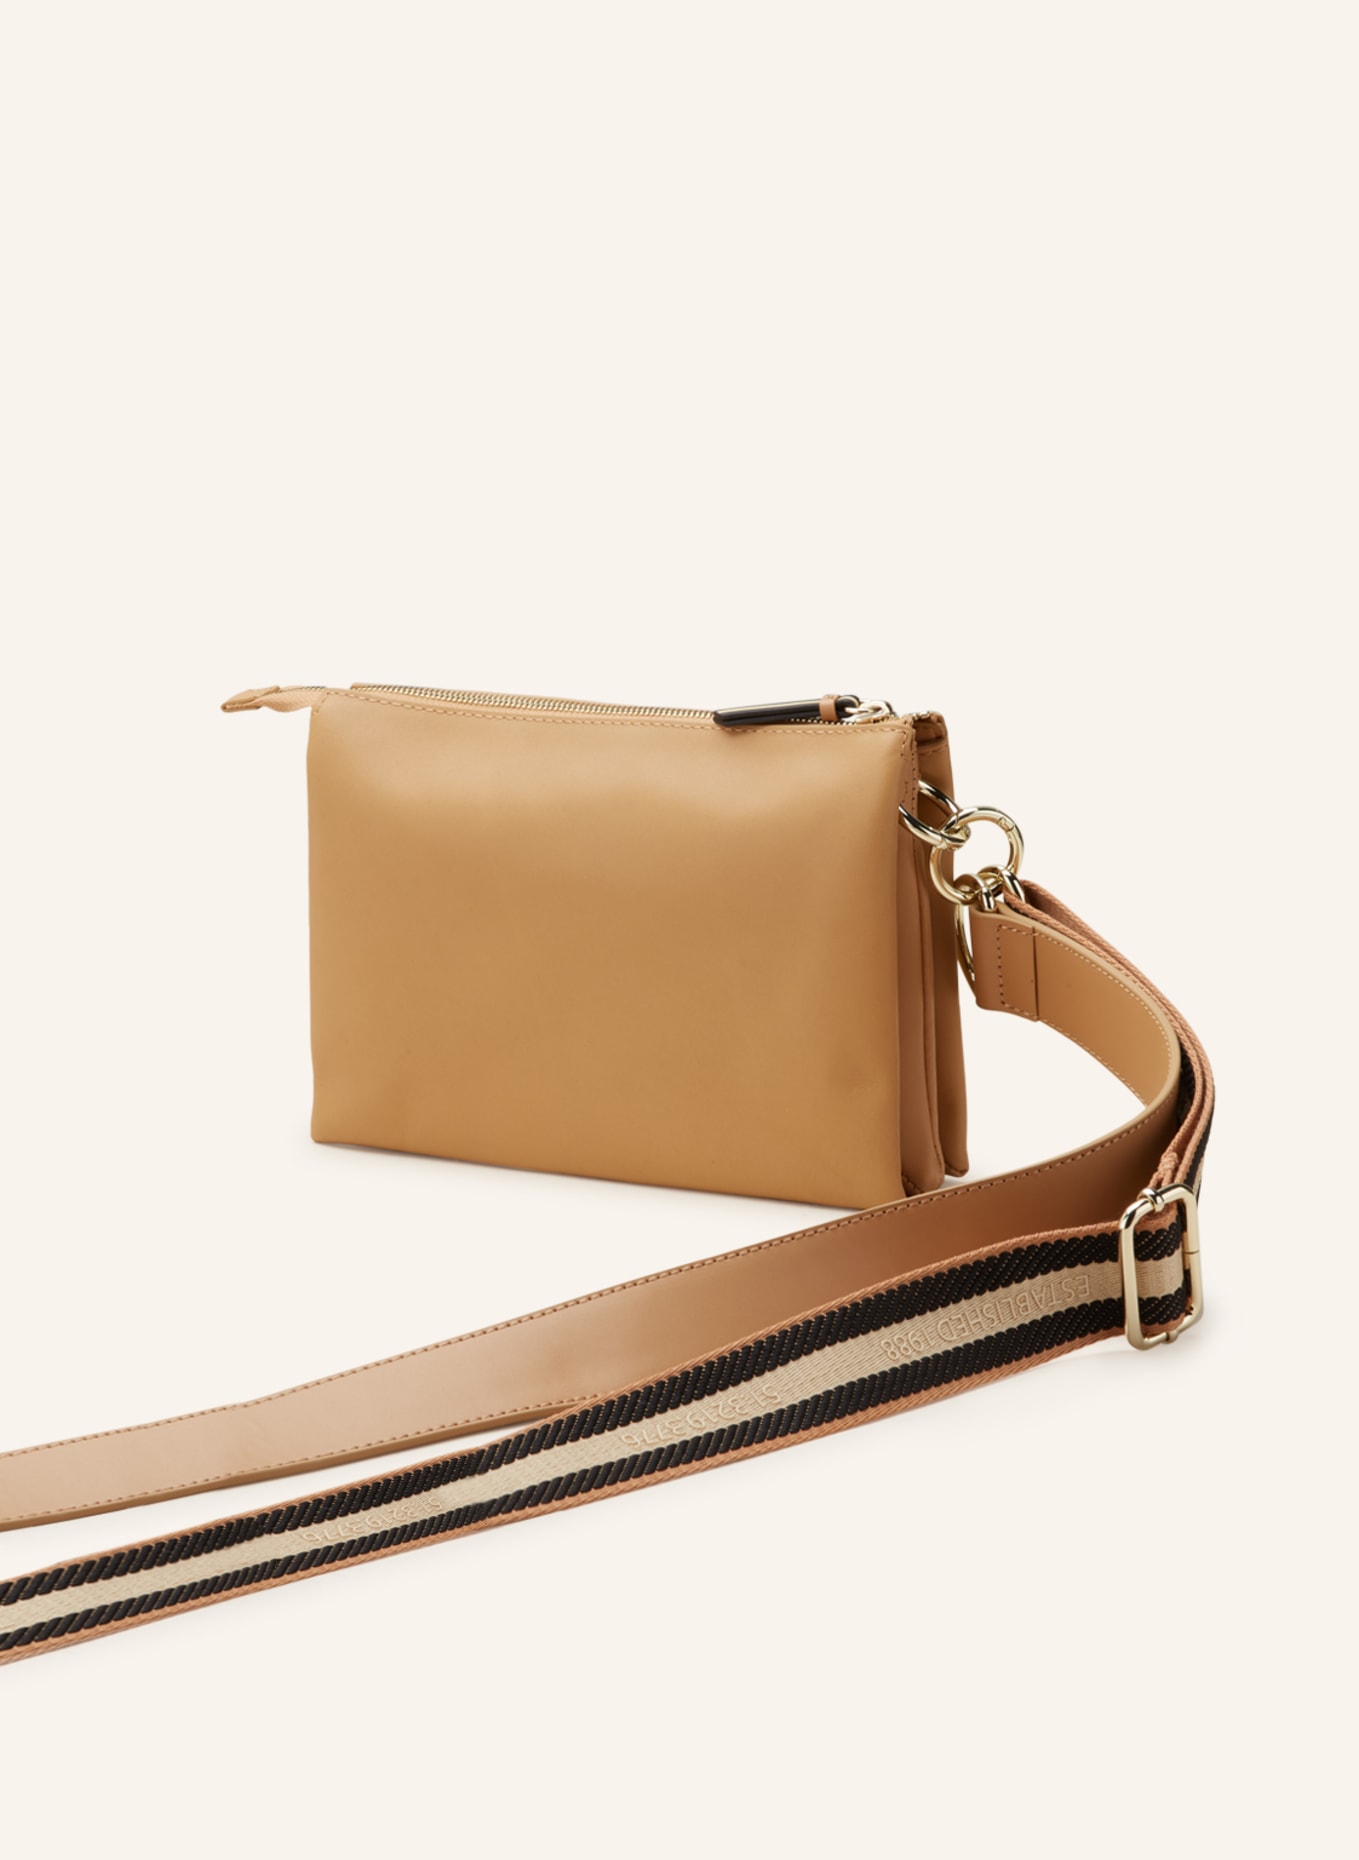 Ted Baker Esille Leather Cross-body Bag in Green